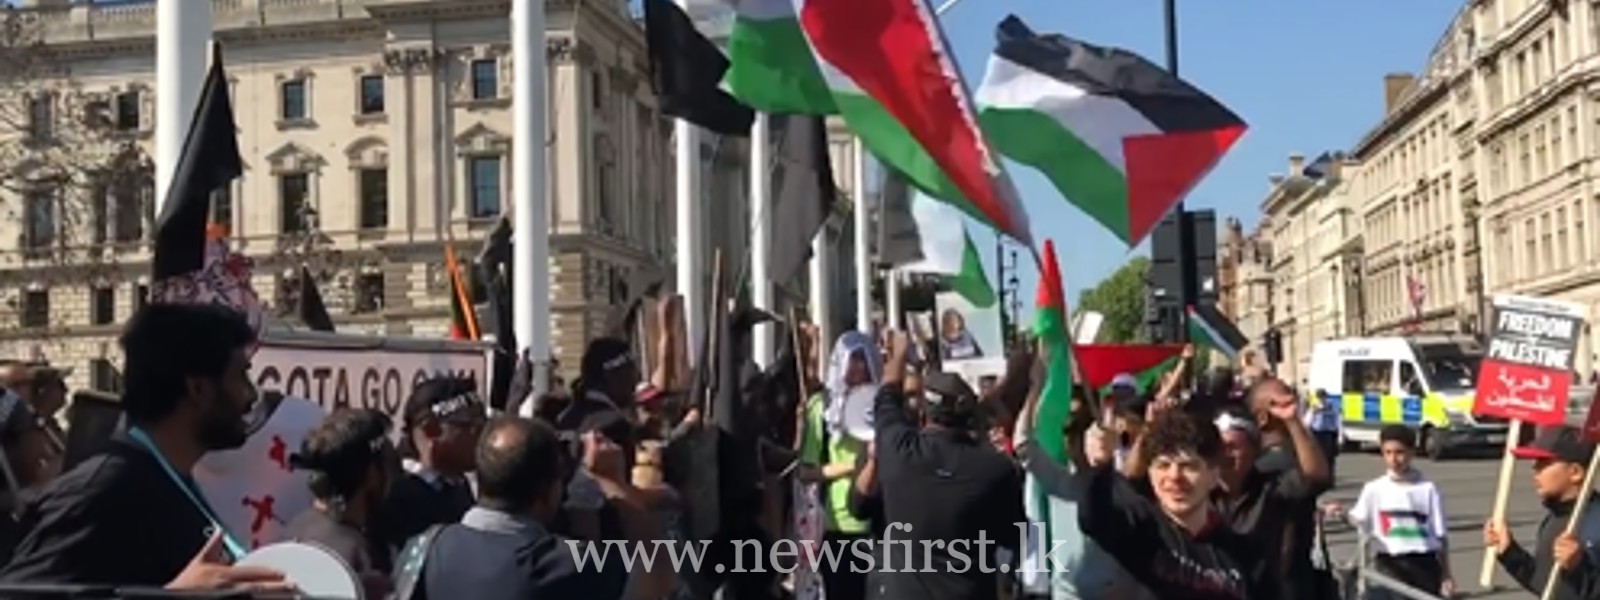 Palestinian protestors support GotaGoHome protest in London